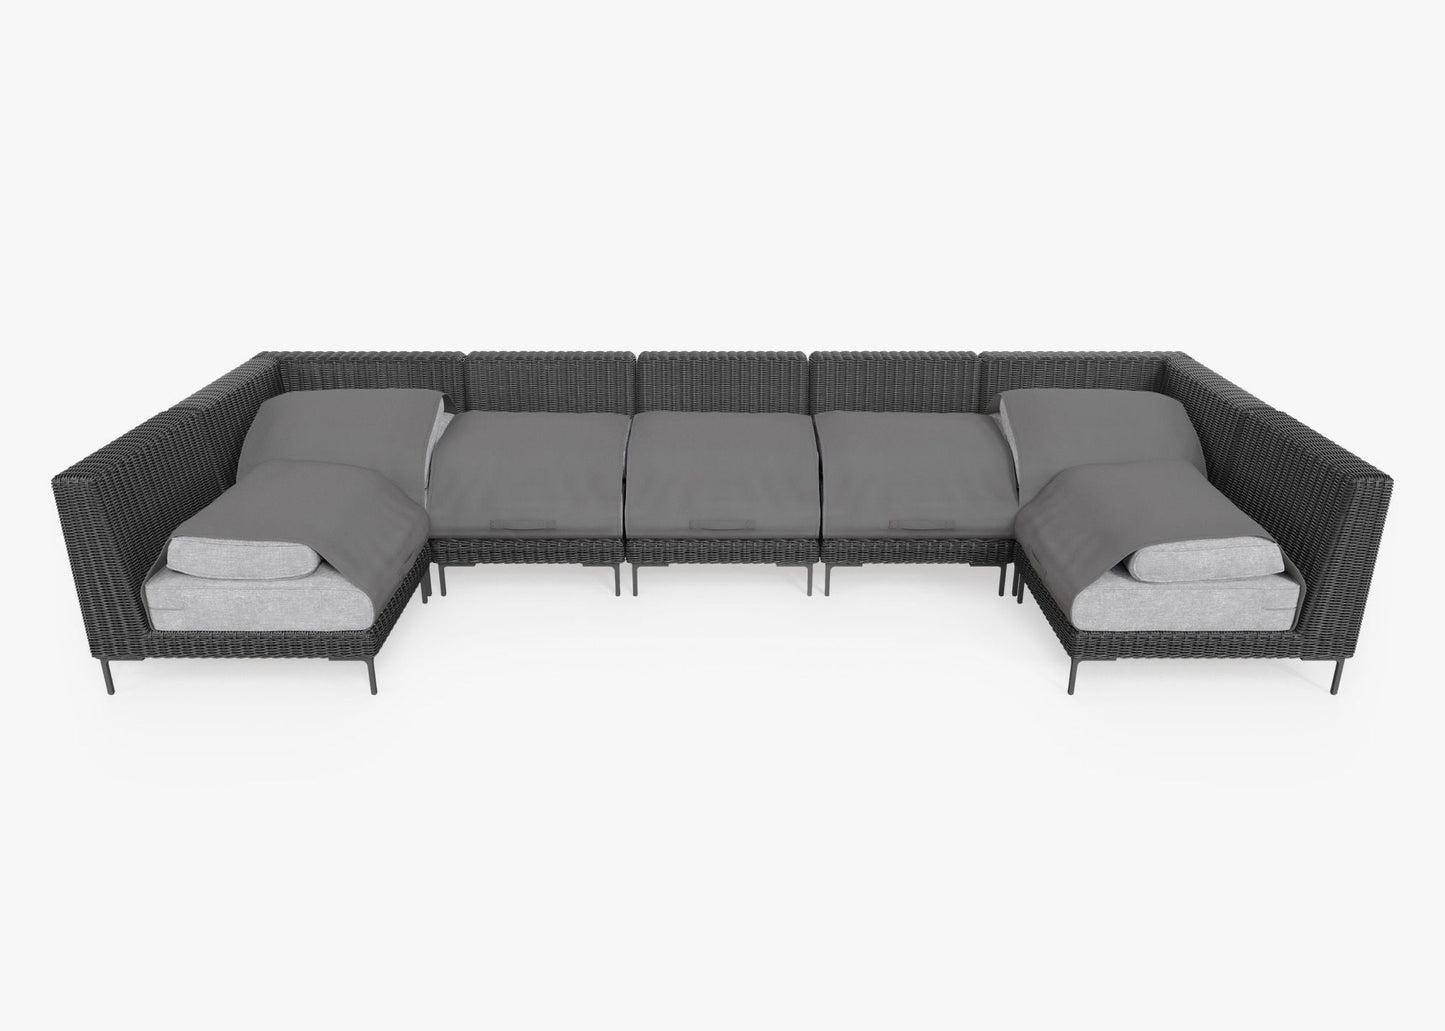 Live Outer 161" x 66" Black Wicker Outdoor U Sectional 7-Seat With Pacific Fog Gray Cushion